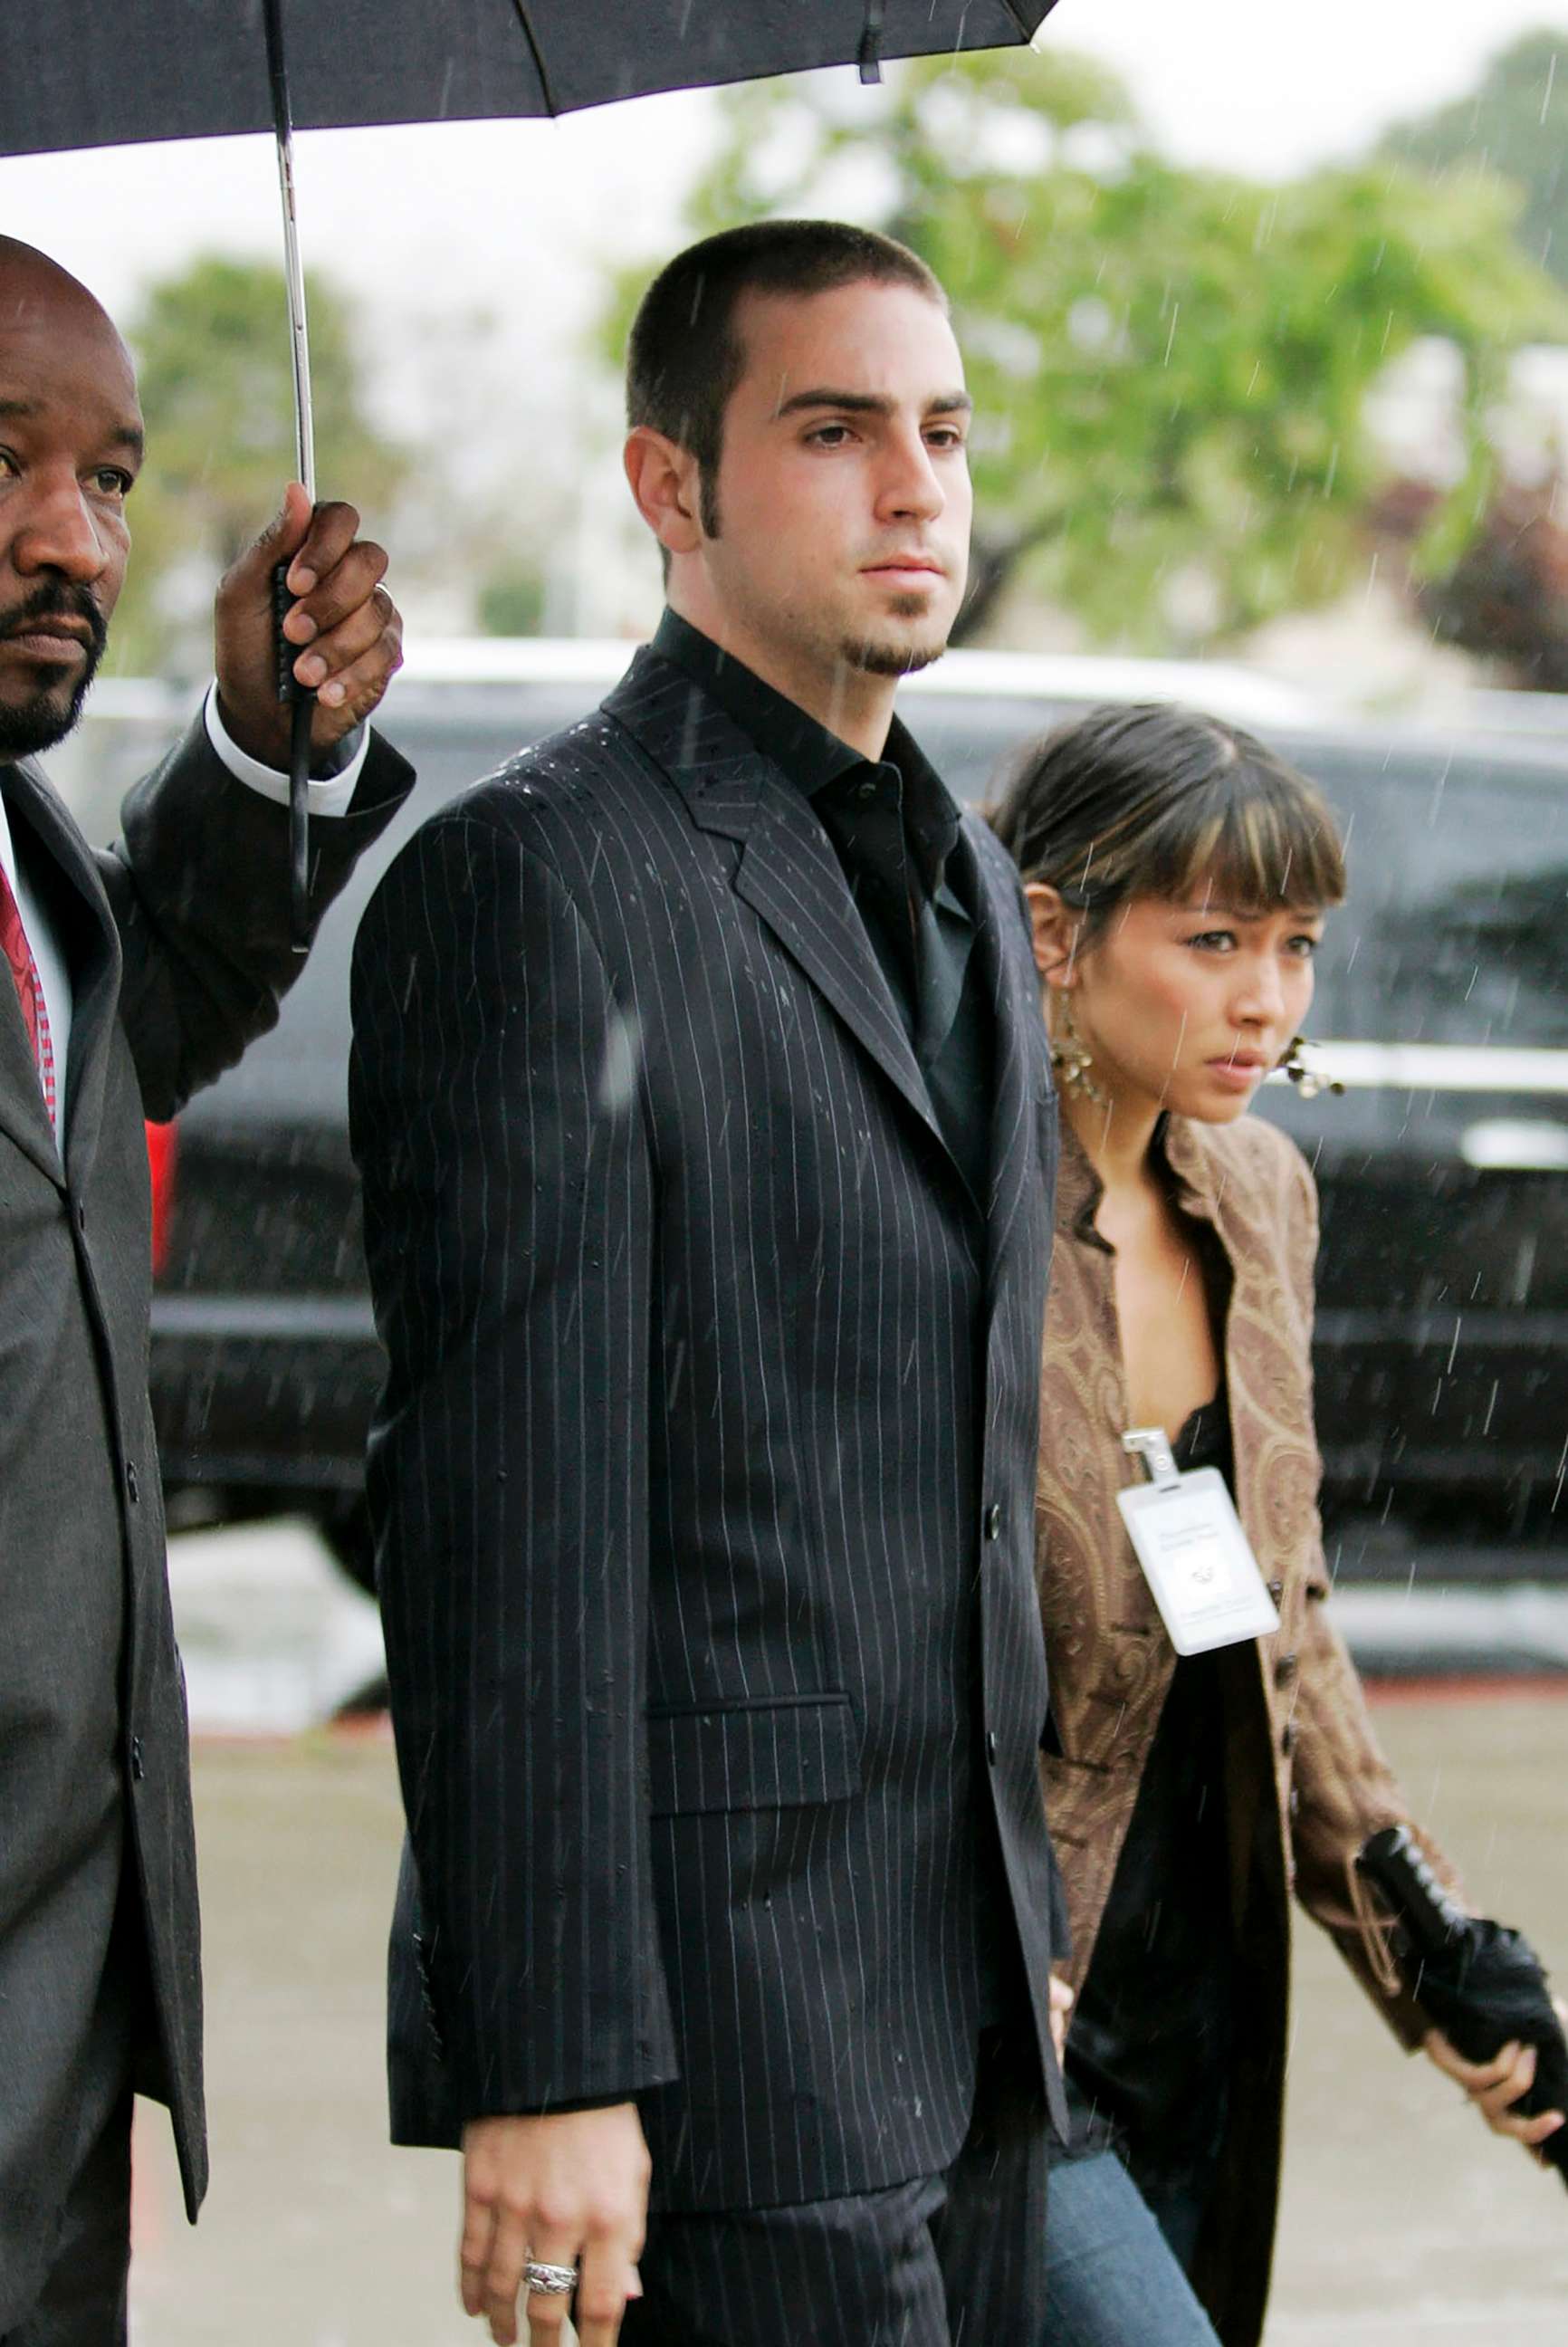 PHOTO: In this May 5, 2005 file photo, defense witness for the Michael Jackson child molestation trial, Wade Robson, center, arrives for court at the Santa Barbara County Courthouse in Santa Maria, Calif.